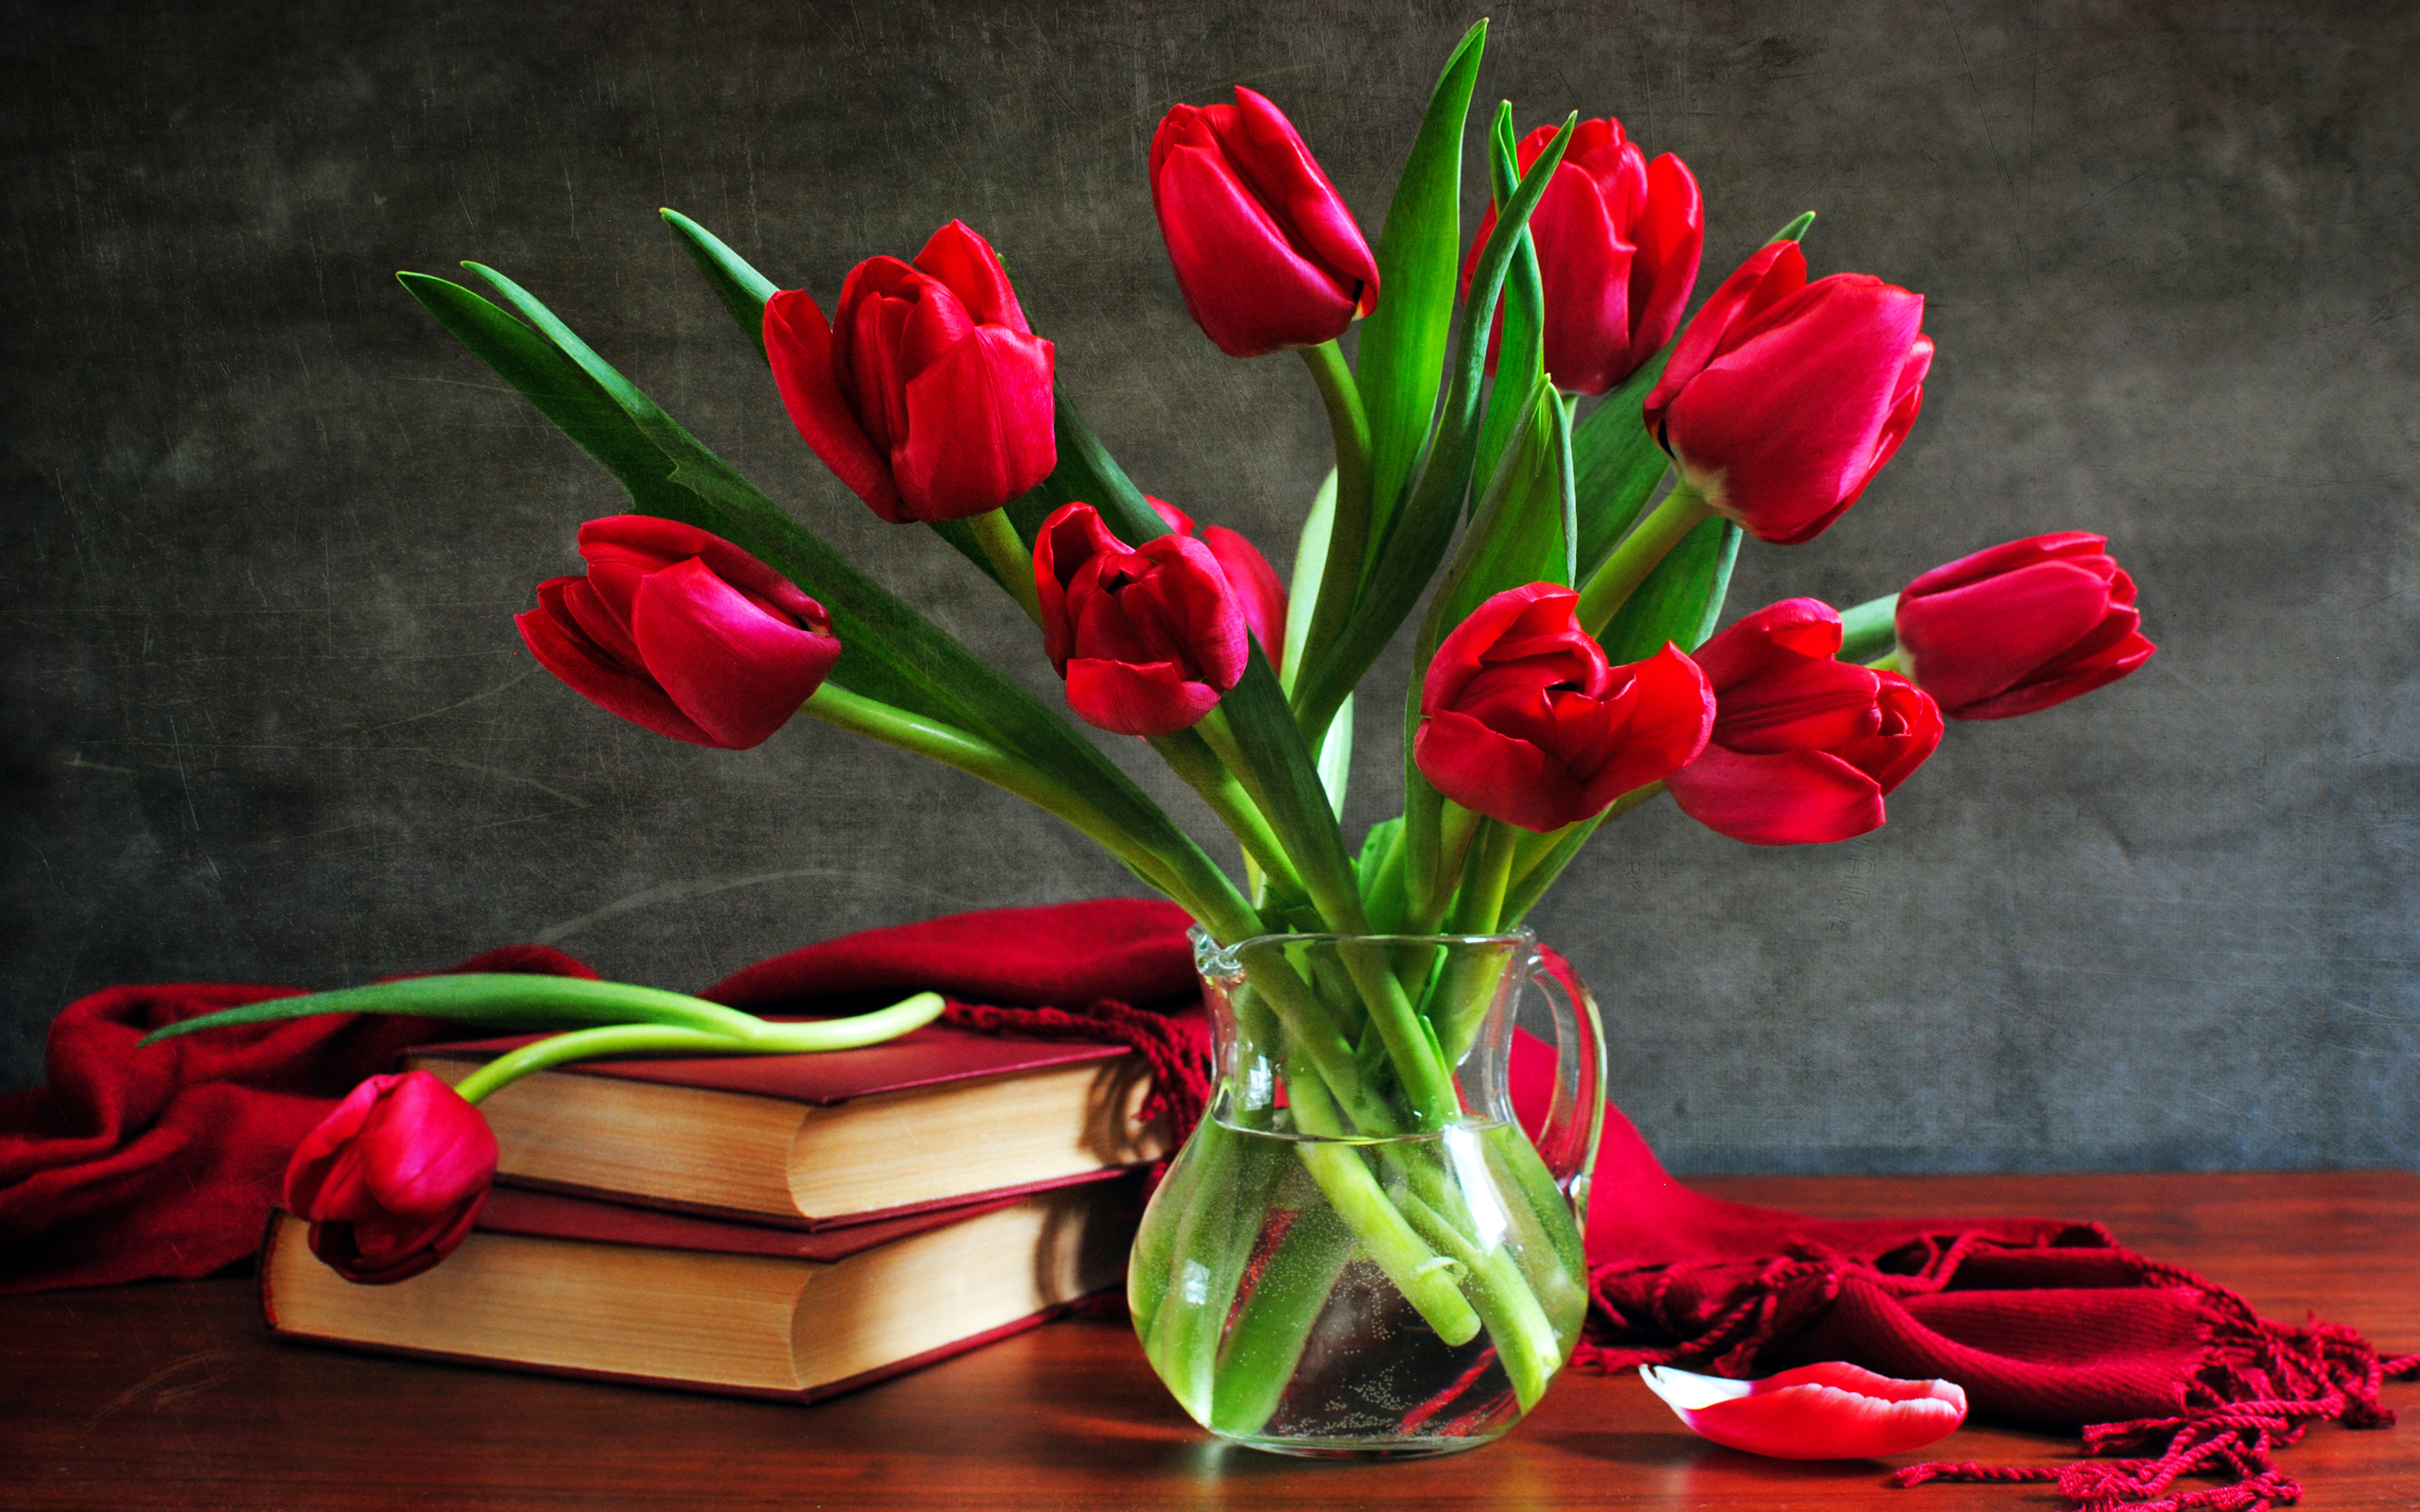 Red tulip, pitcher, scarf, and book on a desktop. Classic still life photography.